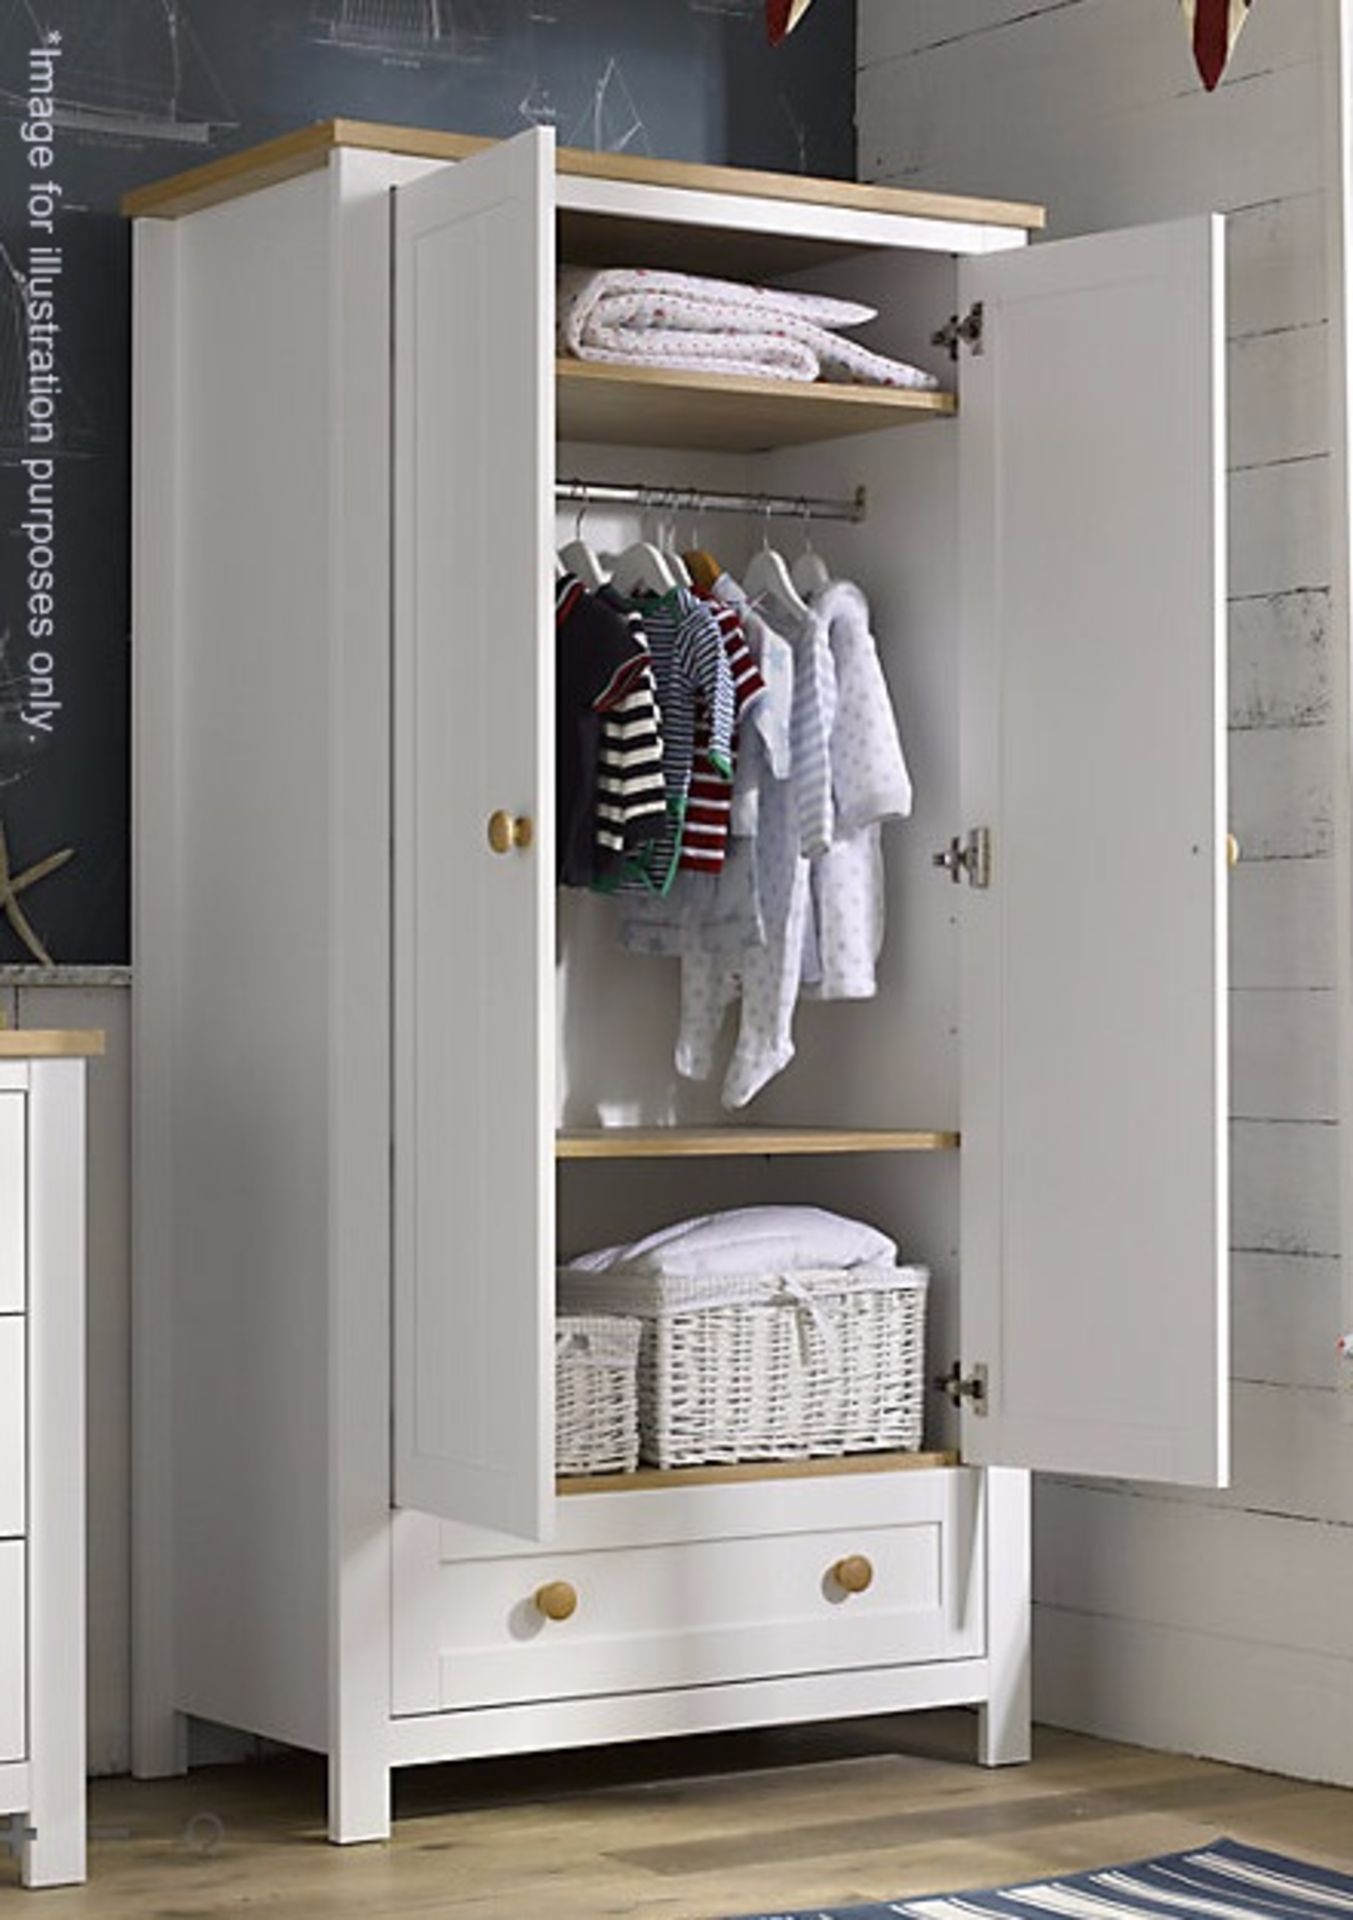 1 x Mothercare Lulworth Wardrobe In Classic White With Oak Effect Details - 52 x 93 x 180cm -